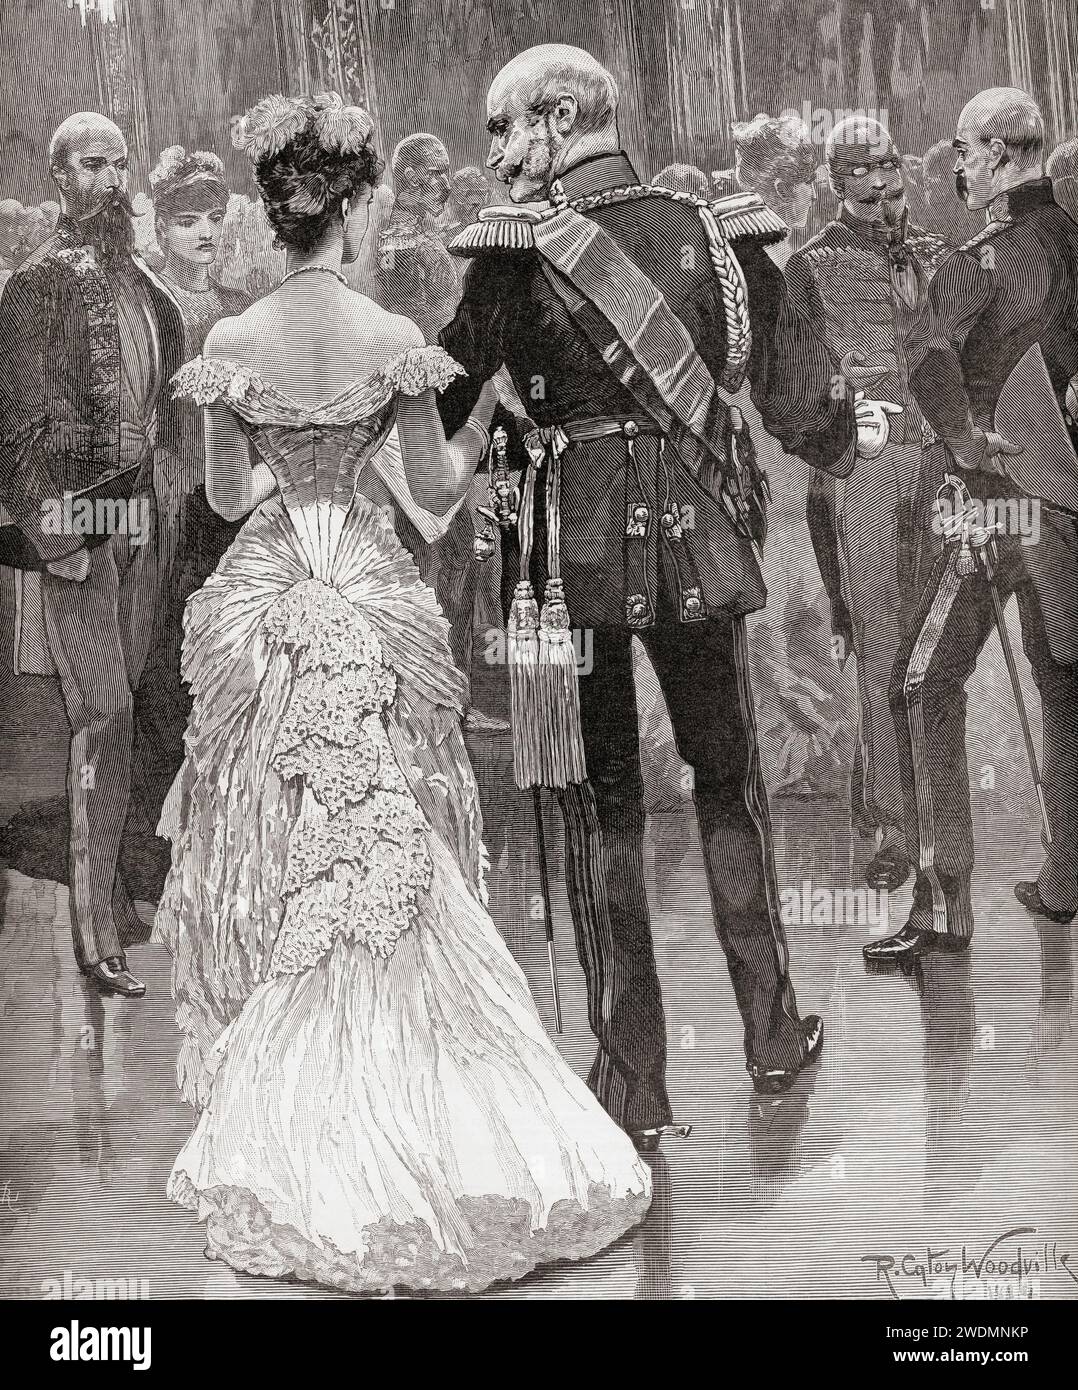 The king of Prussia, at a court ball in 1884, pointing out Bismarck, his new minister of state.  'The king's health visibly mended. 'Voila mon medecin!' he exclaimed, pointing to Bismarck, when a Russian princess complimented him on his altered looks'.  William I or Wilhelm I, 1797 – 1888. King of Prussia from 2 January, 1861 and German Emperor from 18 January 1871 - 1888.  From The London Illustrated News, published March 26, 1887. Stock Photo